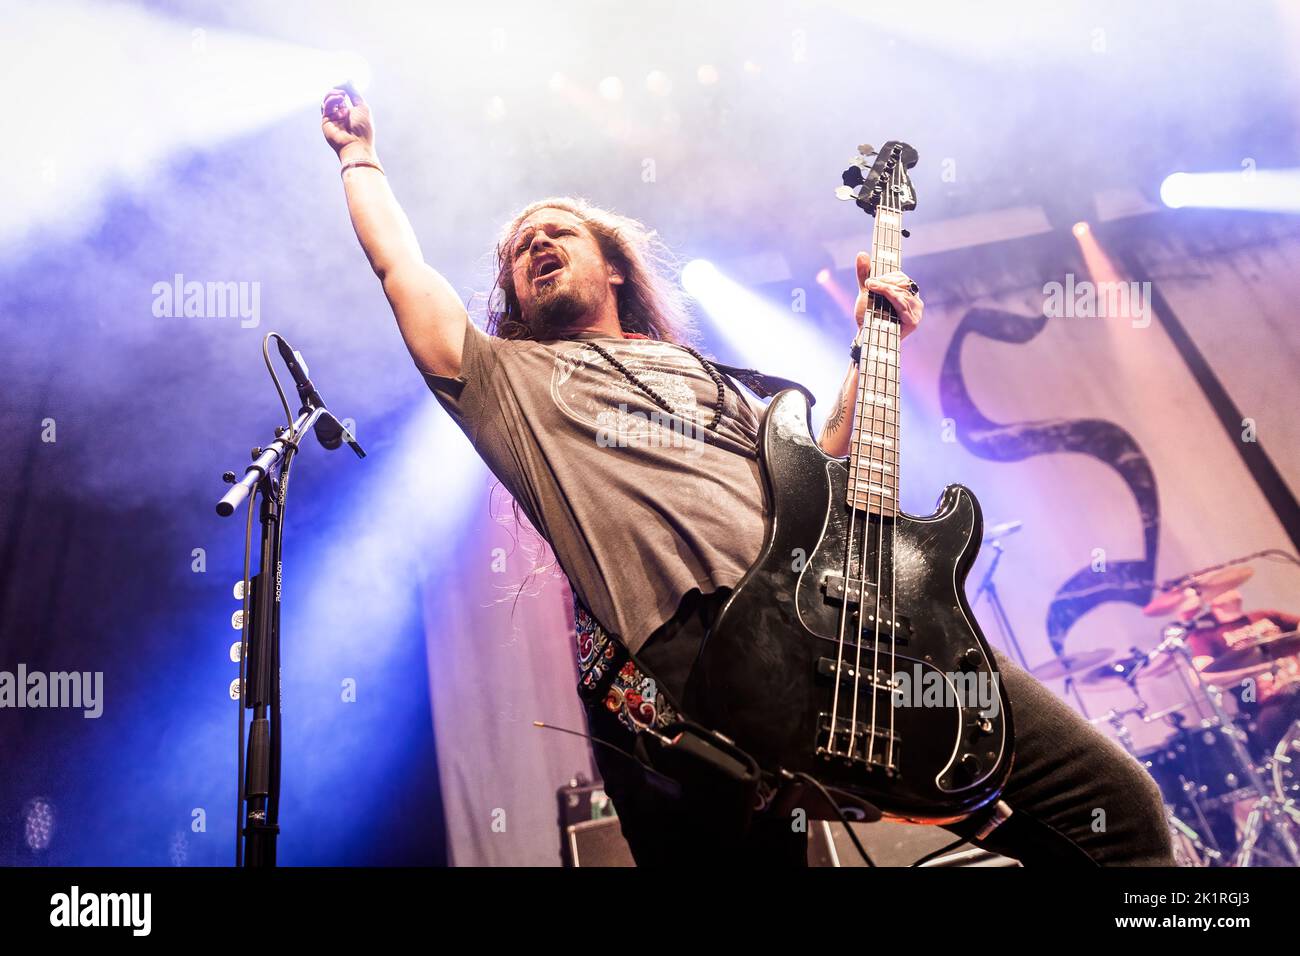 Oslo, Norway. 17th, September 2022. The American rock band Black Stone Cherry performs a live concert at Rockefeller in Oslo. Here bass player Steve Jewell is seen live on stage. (Photo credit: Gonzales Photo - Terje Dokken). Stock Photo